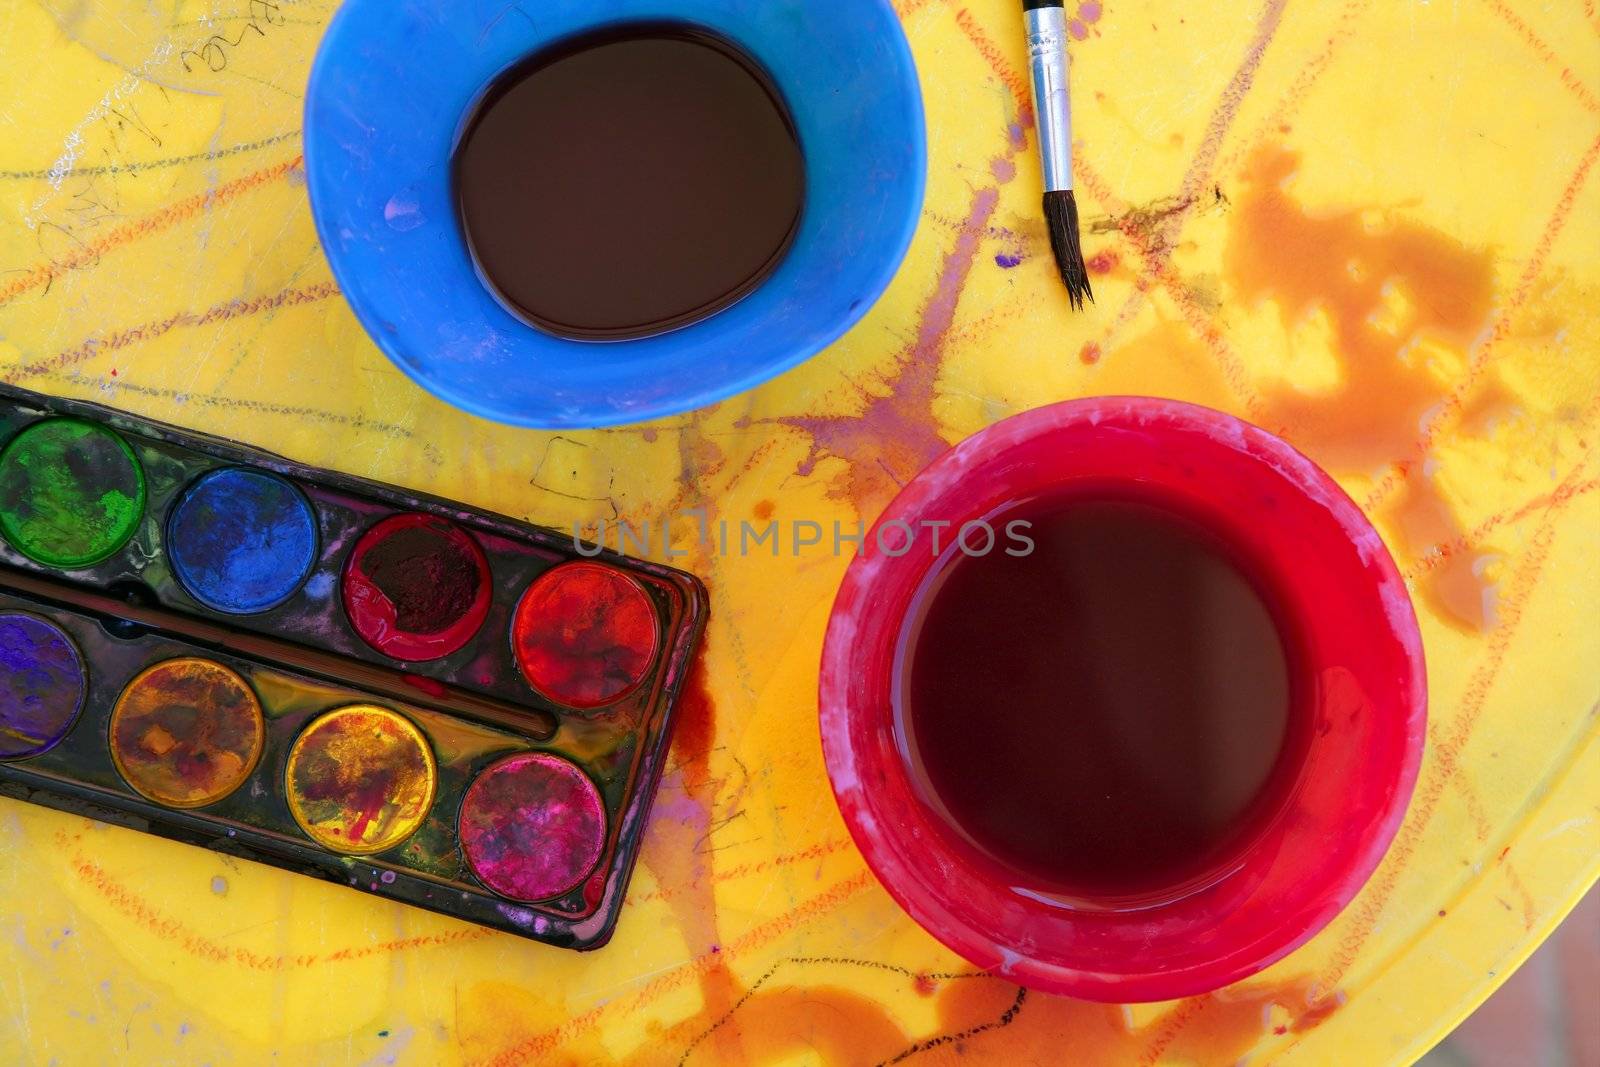 Children messy dirty student watercolor table in vivid colors